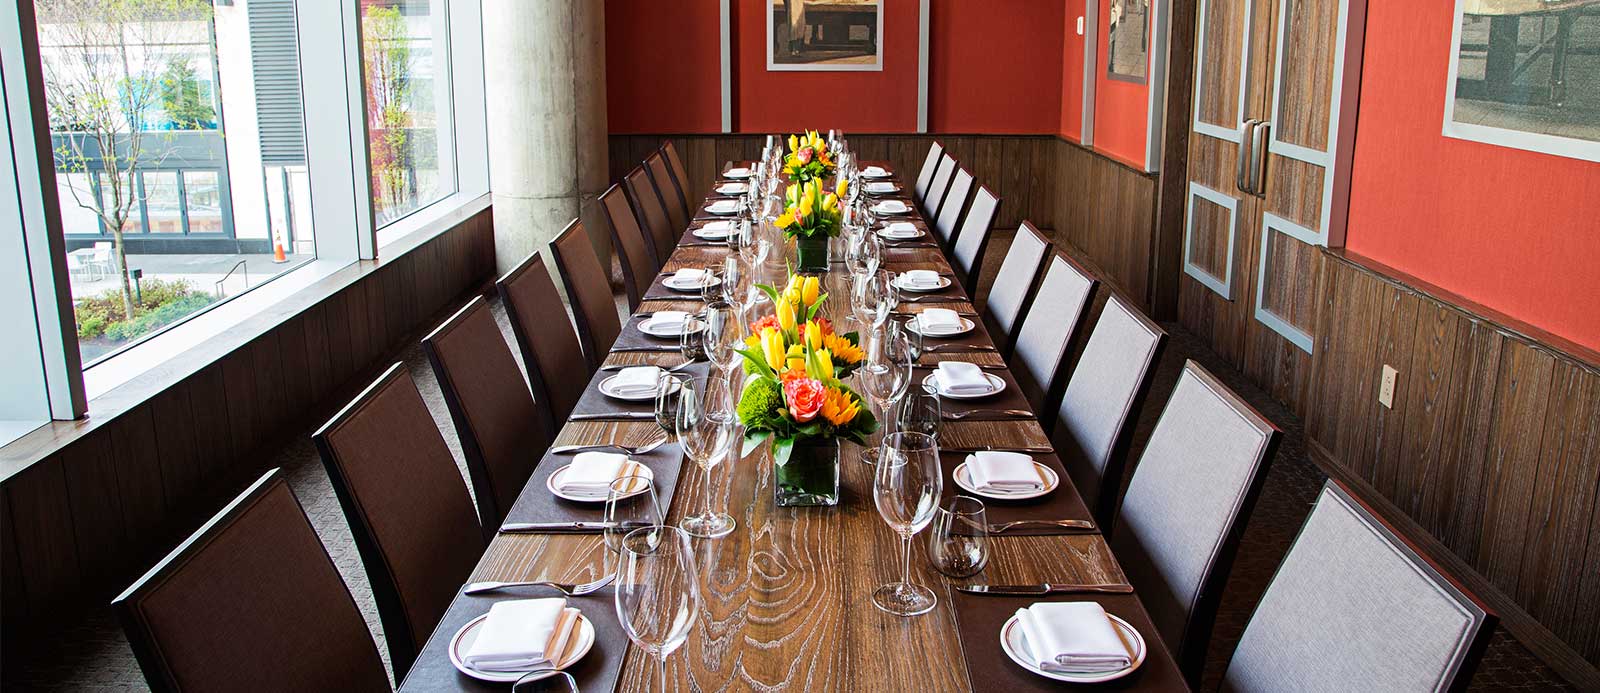 100 Private Dining Rooms Dc Home Bistro Bistro DcLost